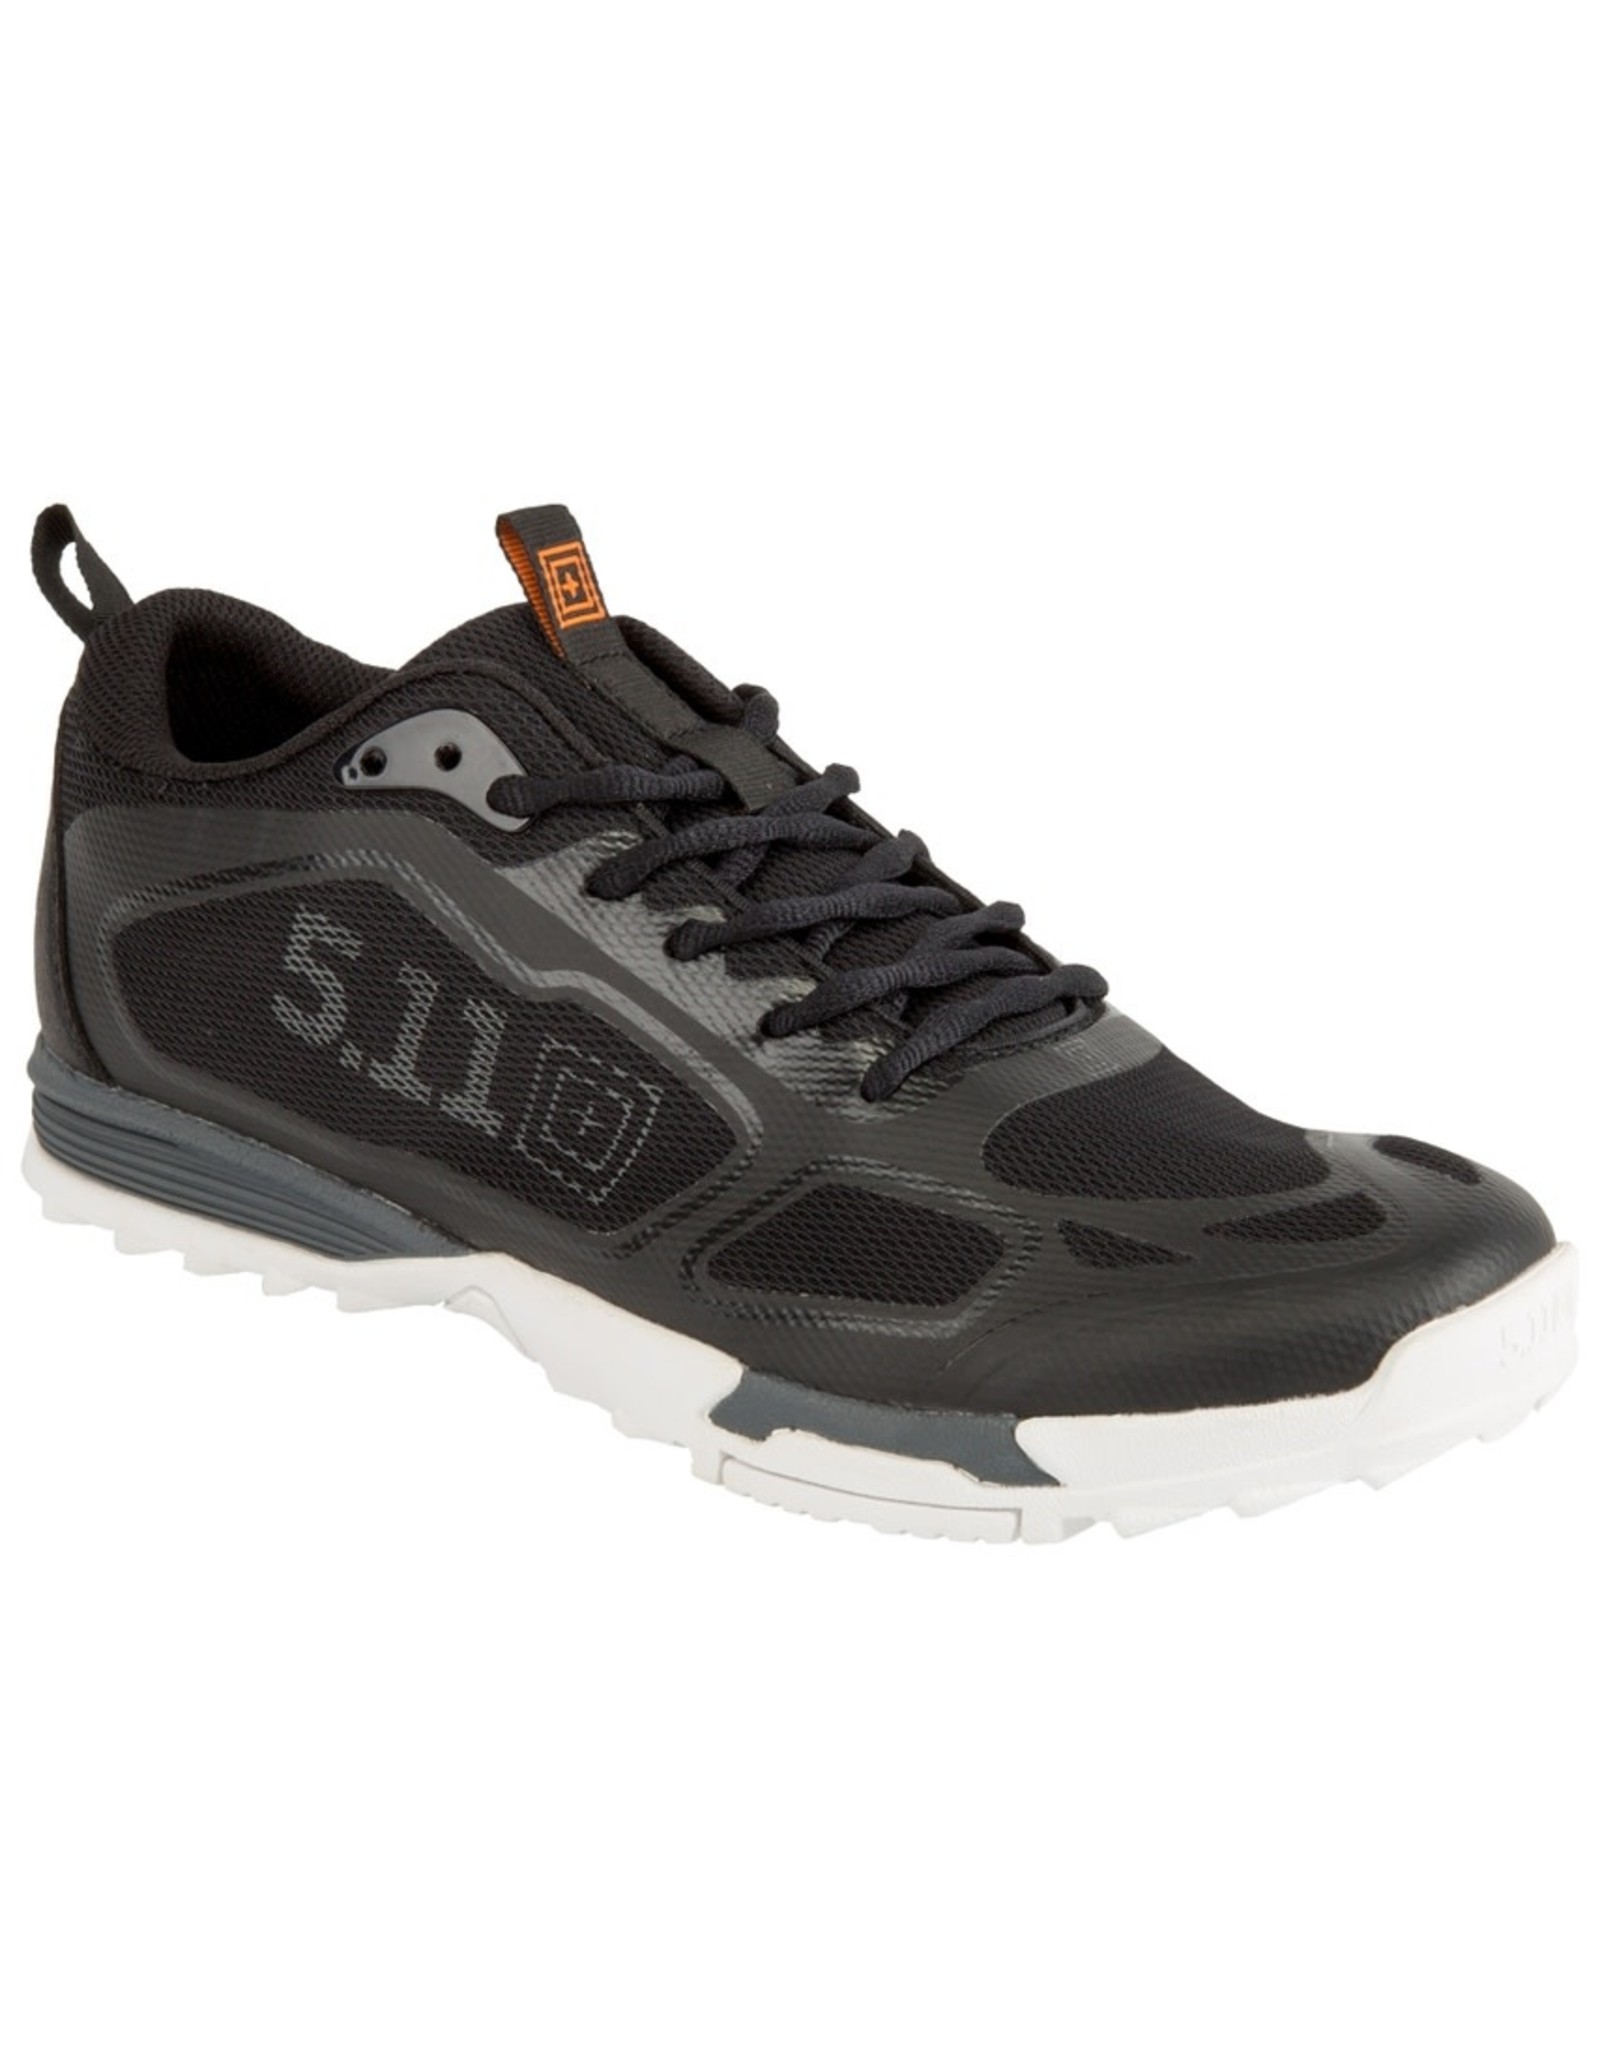 5.11 Tactical Women's ABR Trainer